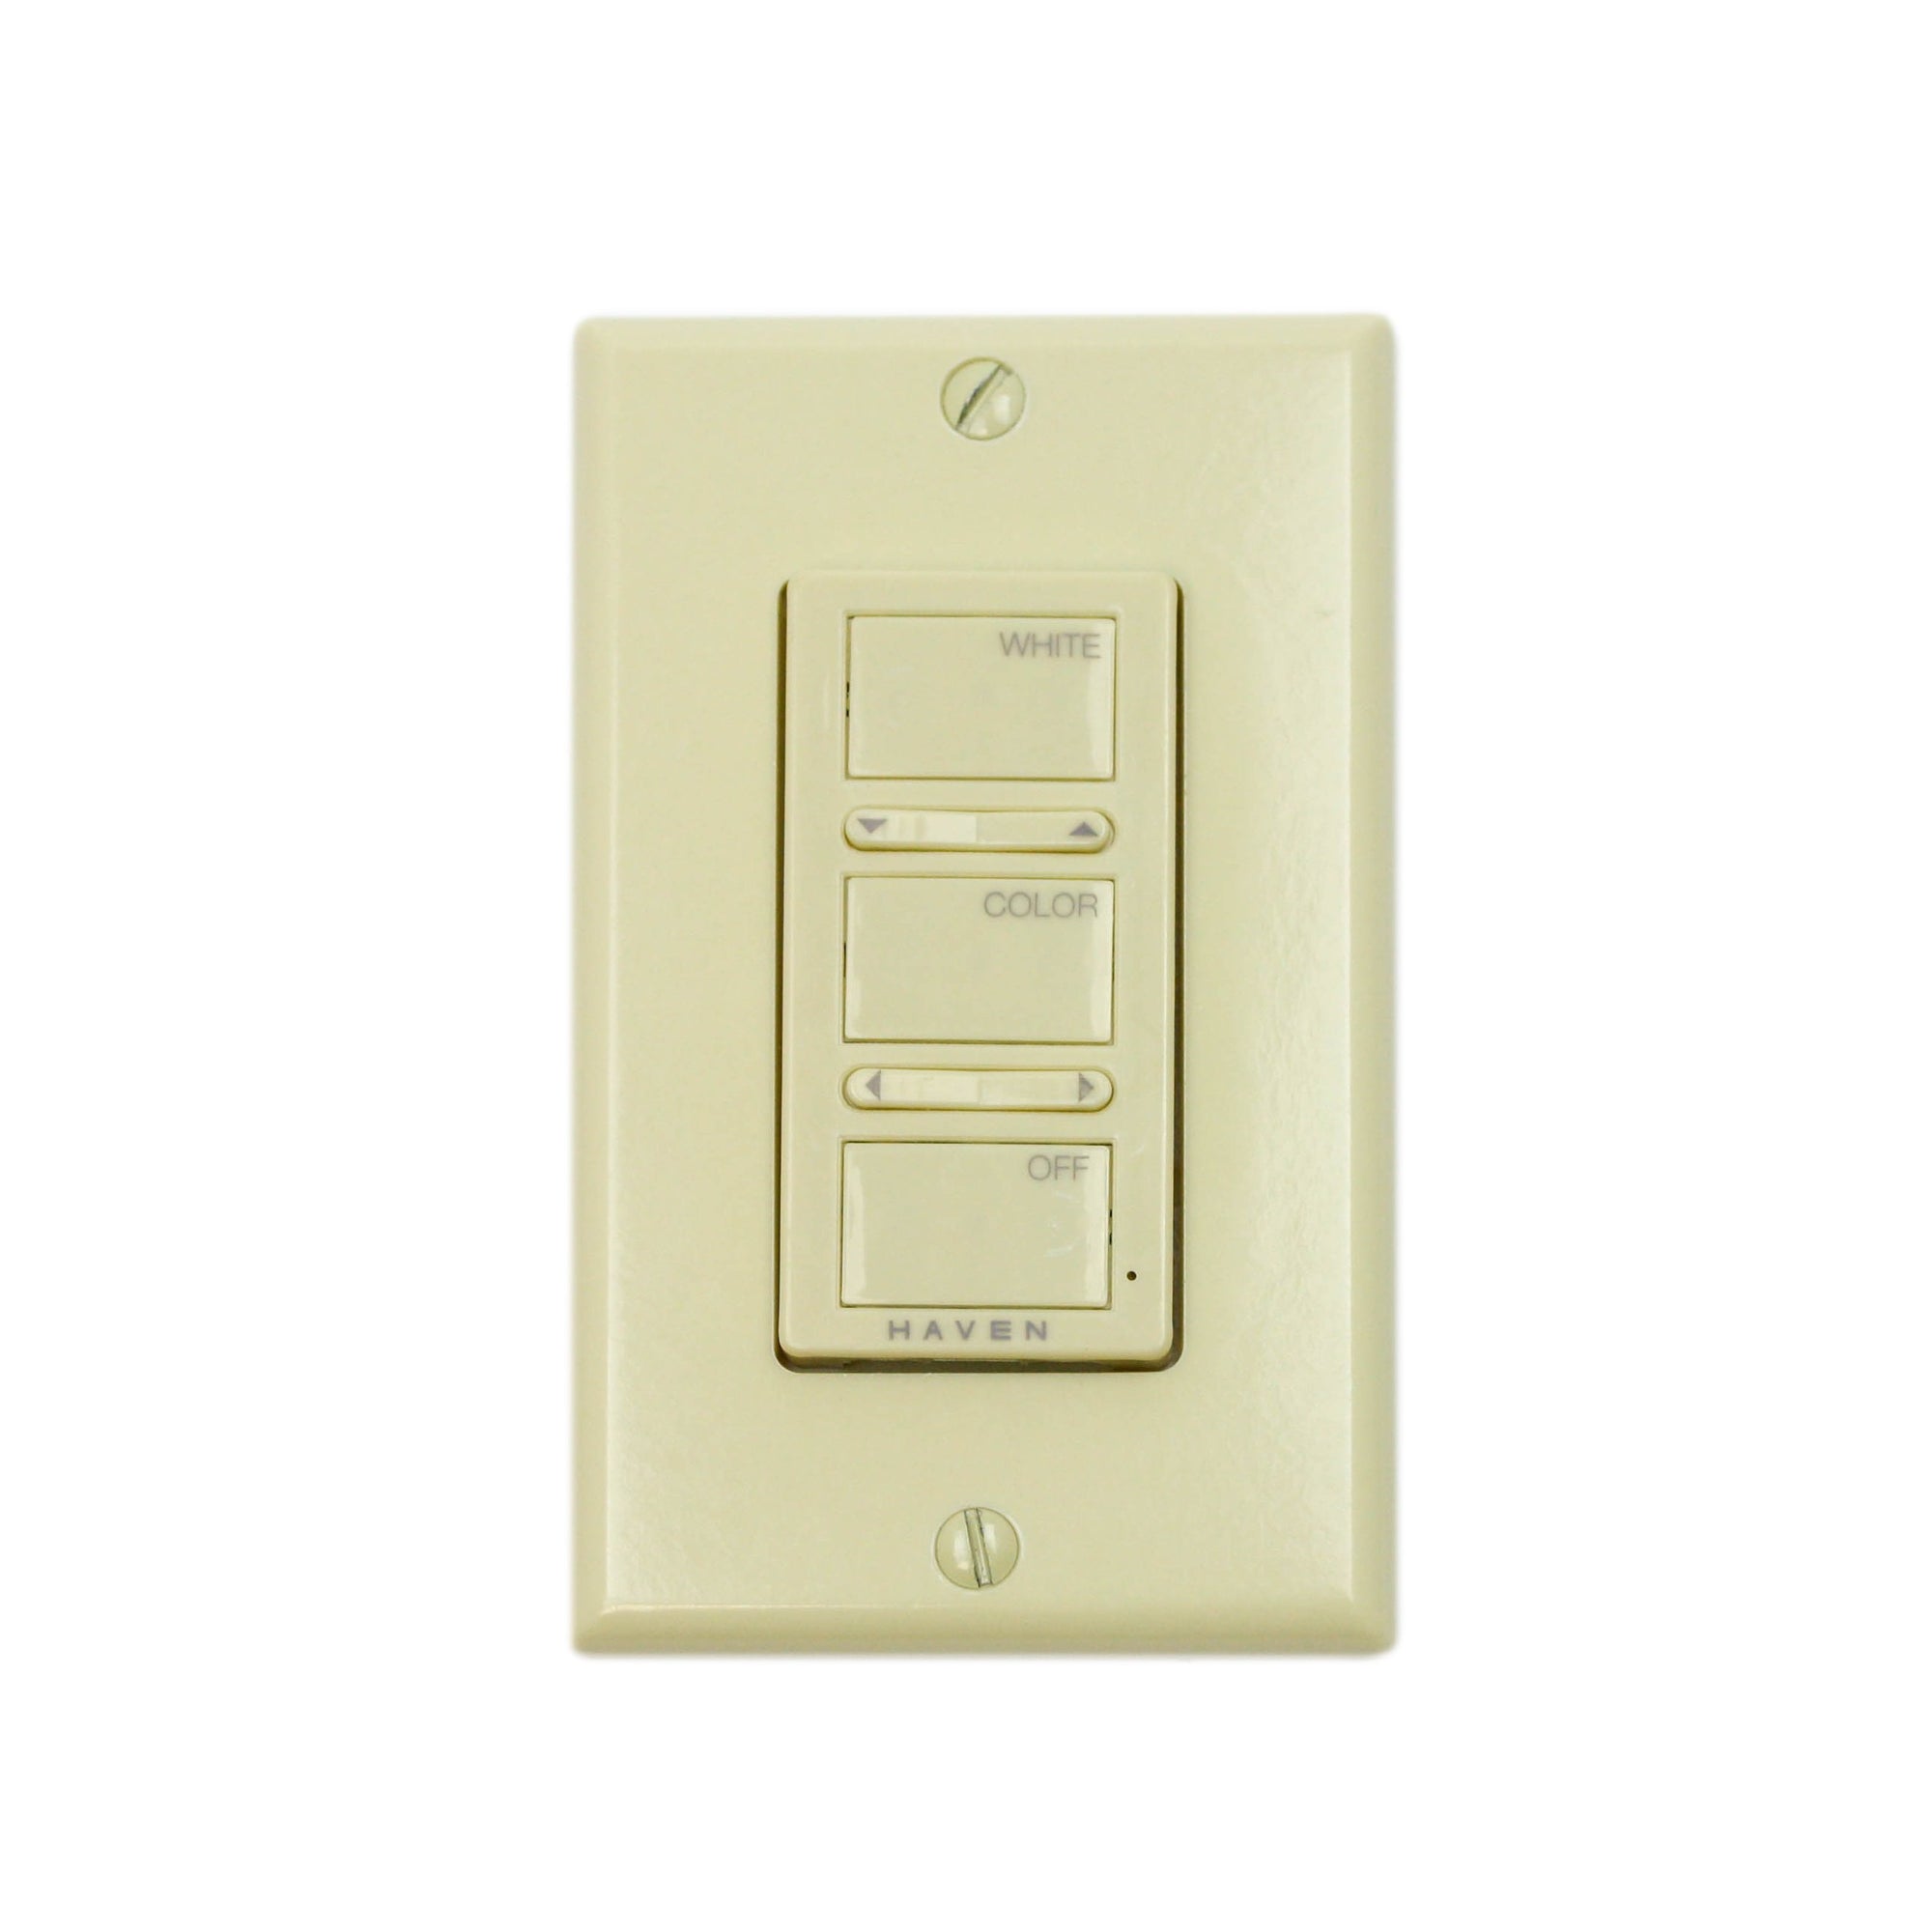 Full Color Wireless Wall Switch Wireless Wall Switch Haven Lighting Ivory 